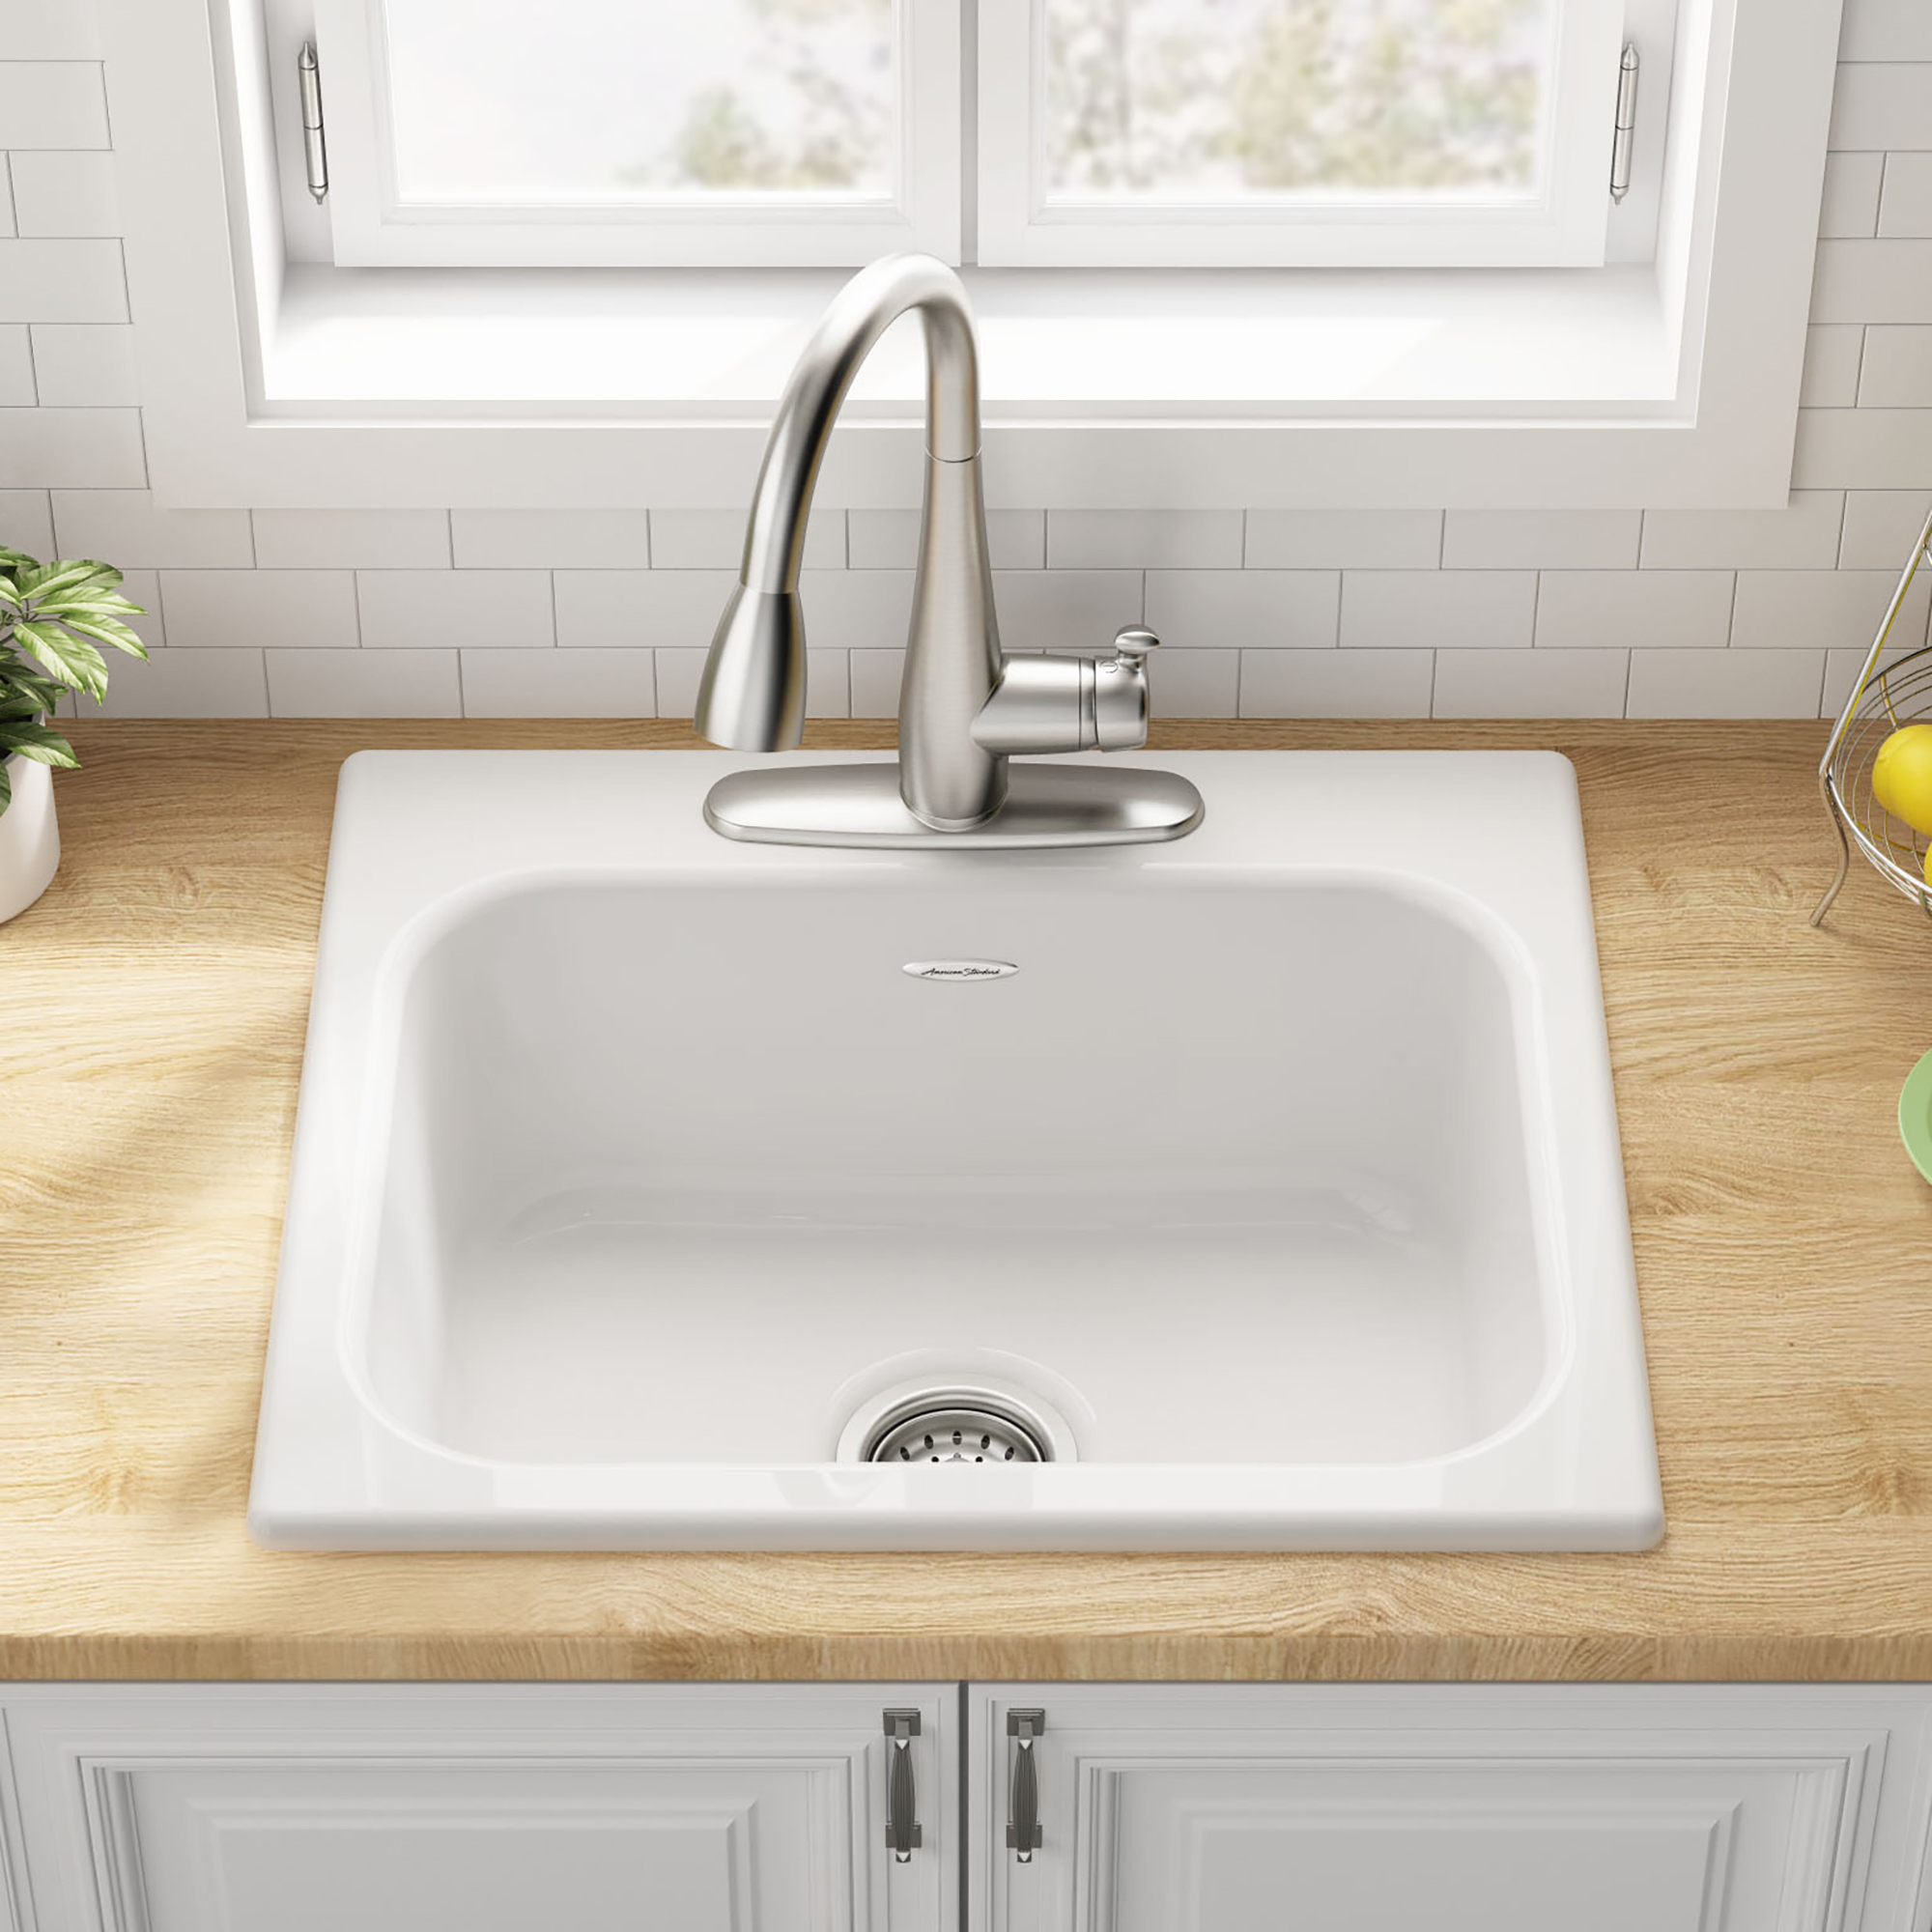 American Standard Quince Drop-in Cast Iron 25 in. 3-Hole Single Bowl Kitchen Sink in Brilliant White - image 3 of 6